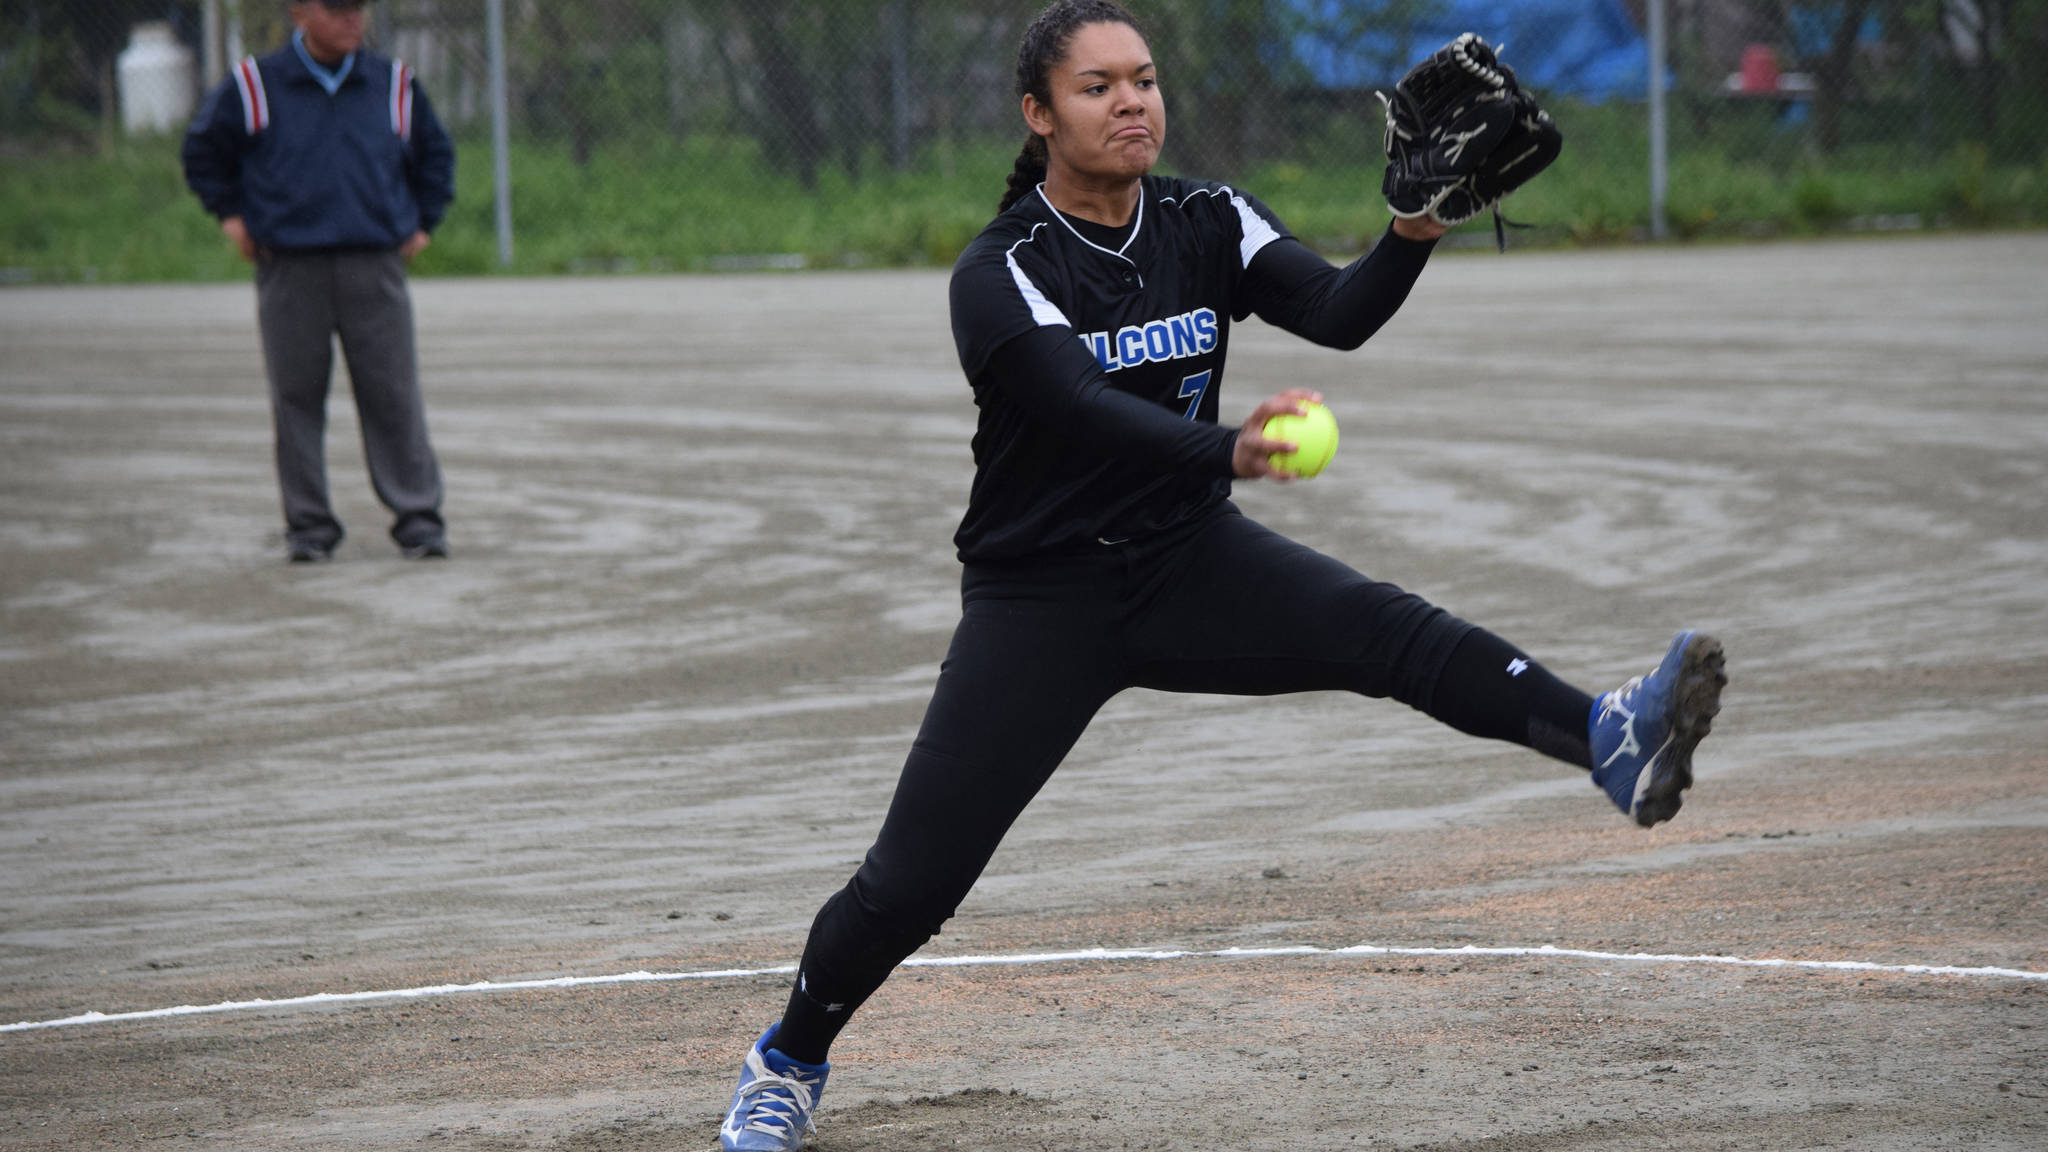 Kyra Jenkins Hayes warms up before Thursday’s Region V tournament game against Sitka, May 26, at Melvin Park. TMHS won 12-3. (Nolin Ainsworth | Juneau Empire)